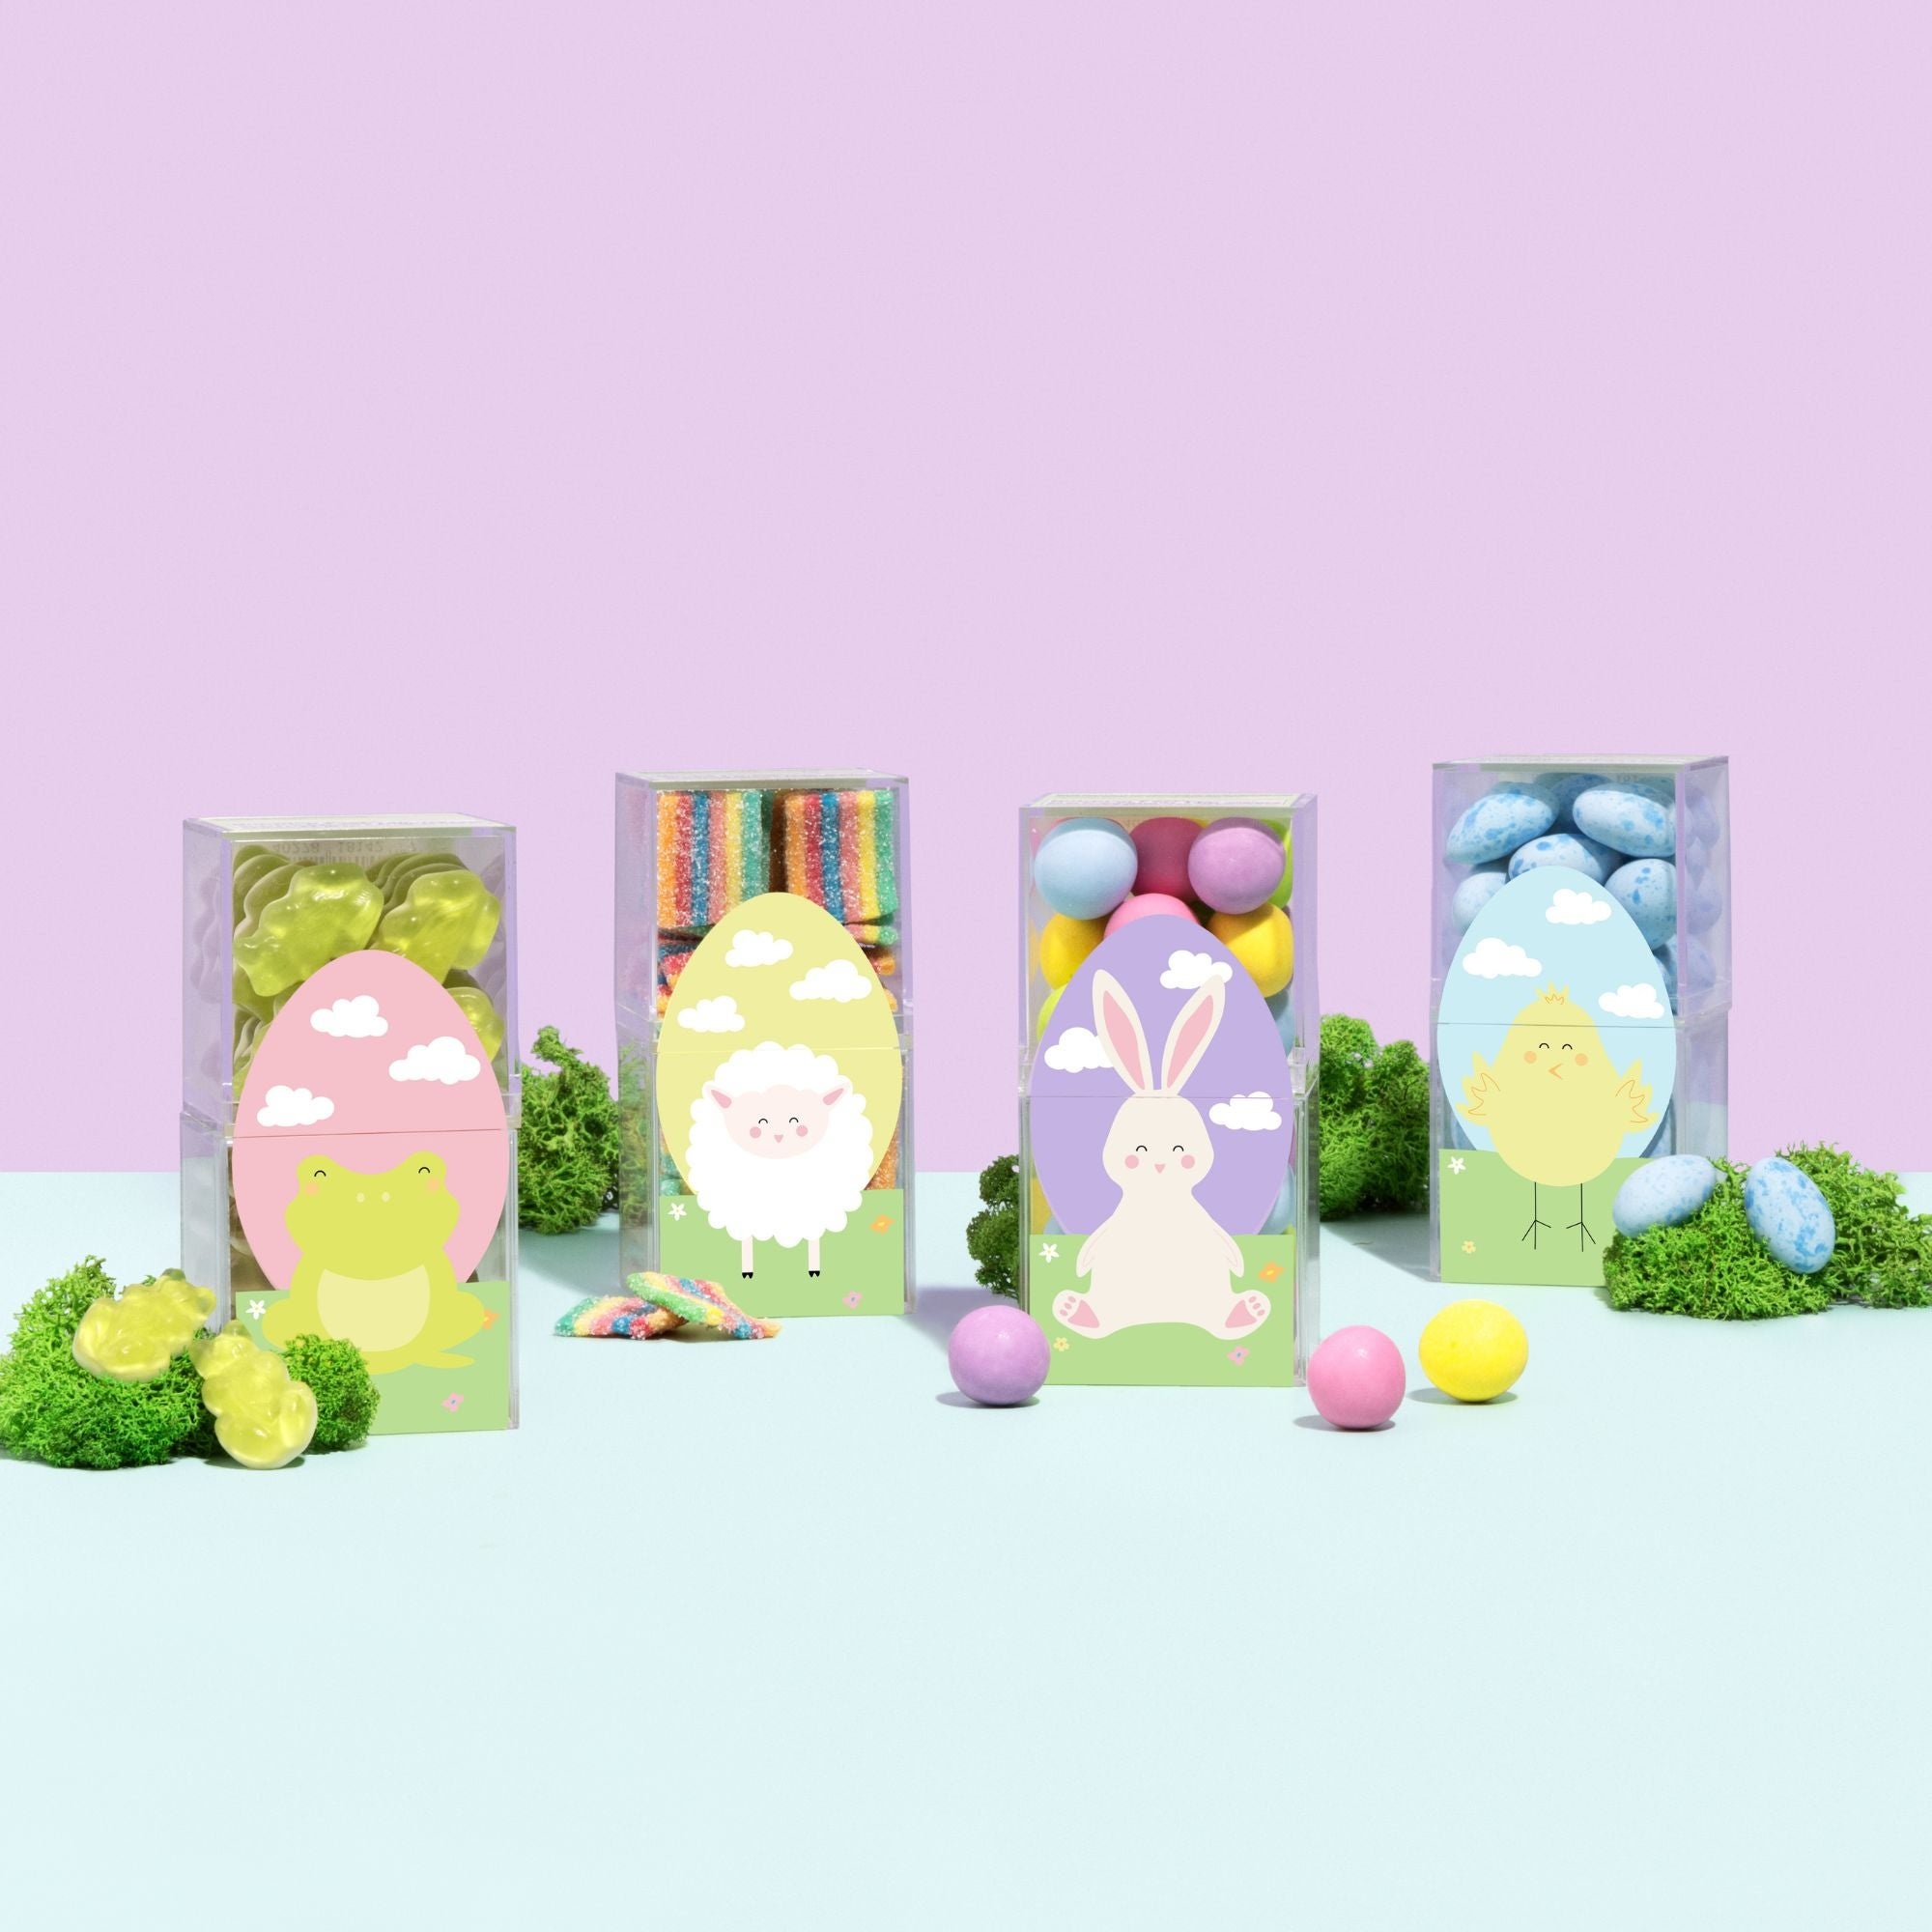 Sugarfina Apple Frogs (Easter)